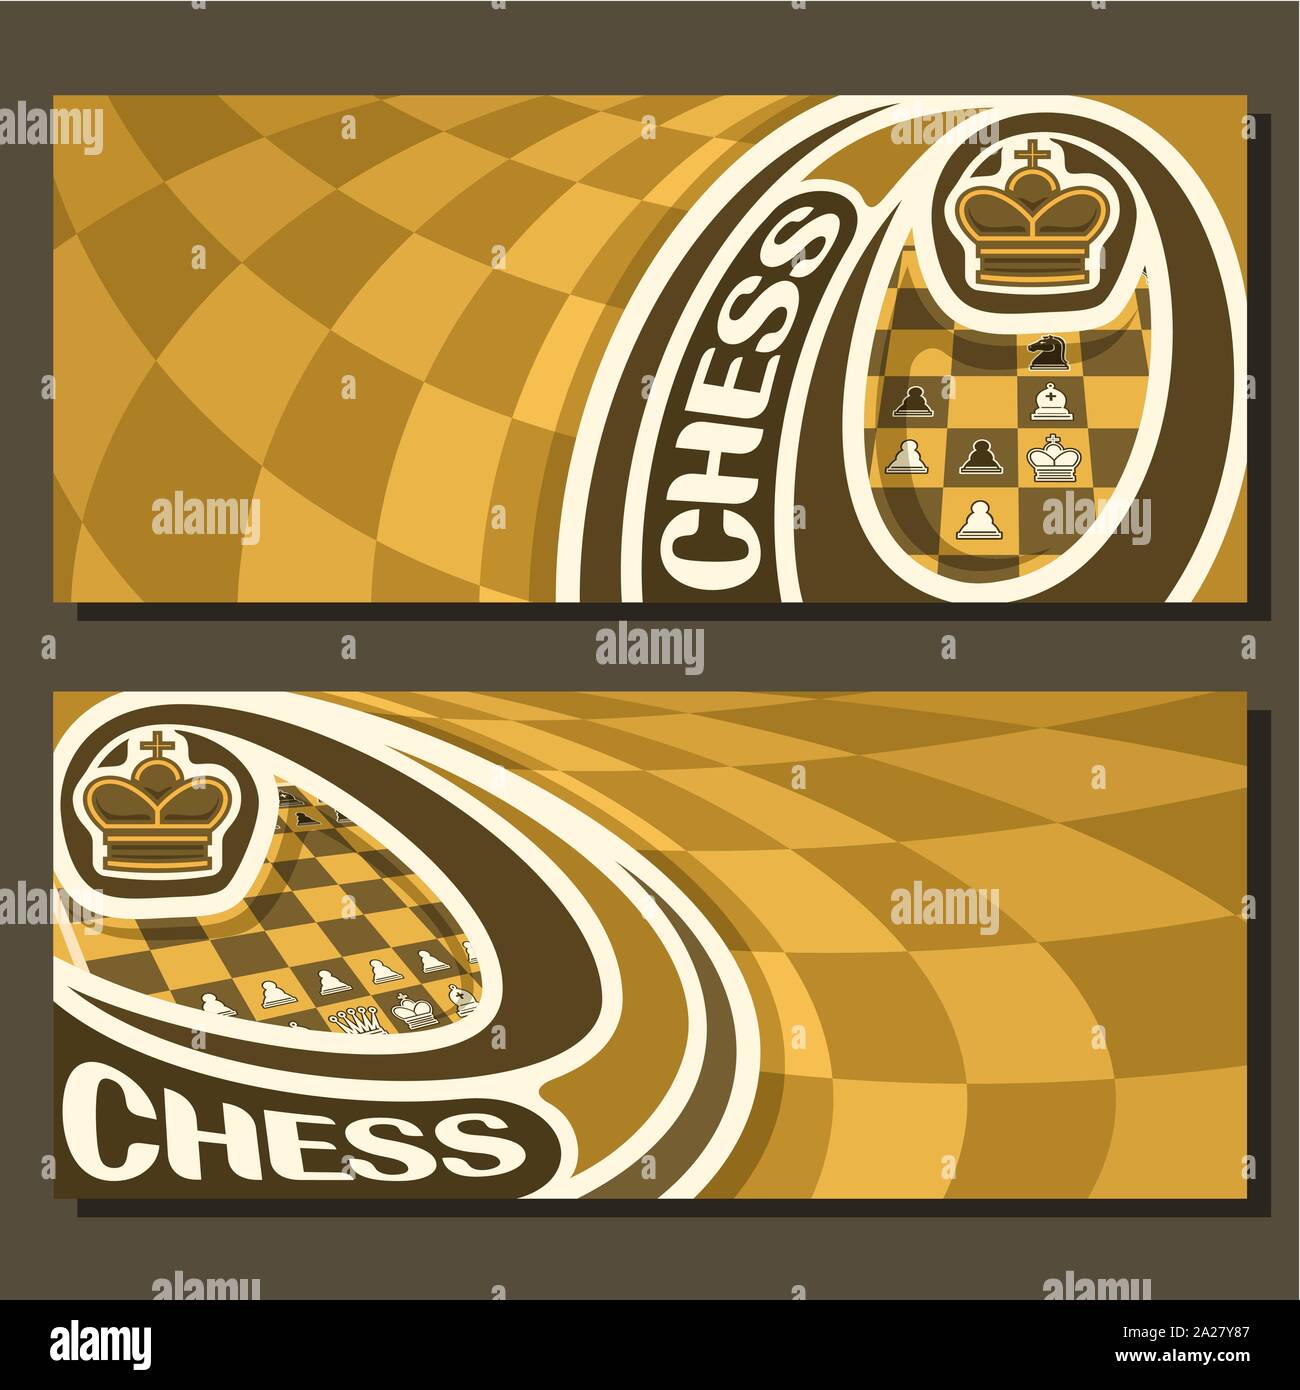 Vector banners for Chess game with copy space, in layouts yellow & brown curved checkerboard squares for title text on chess theme, original font for Stock Vector